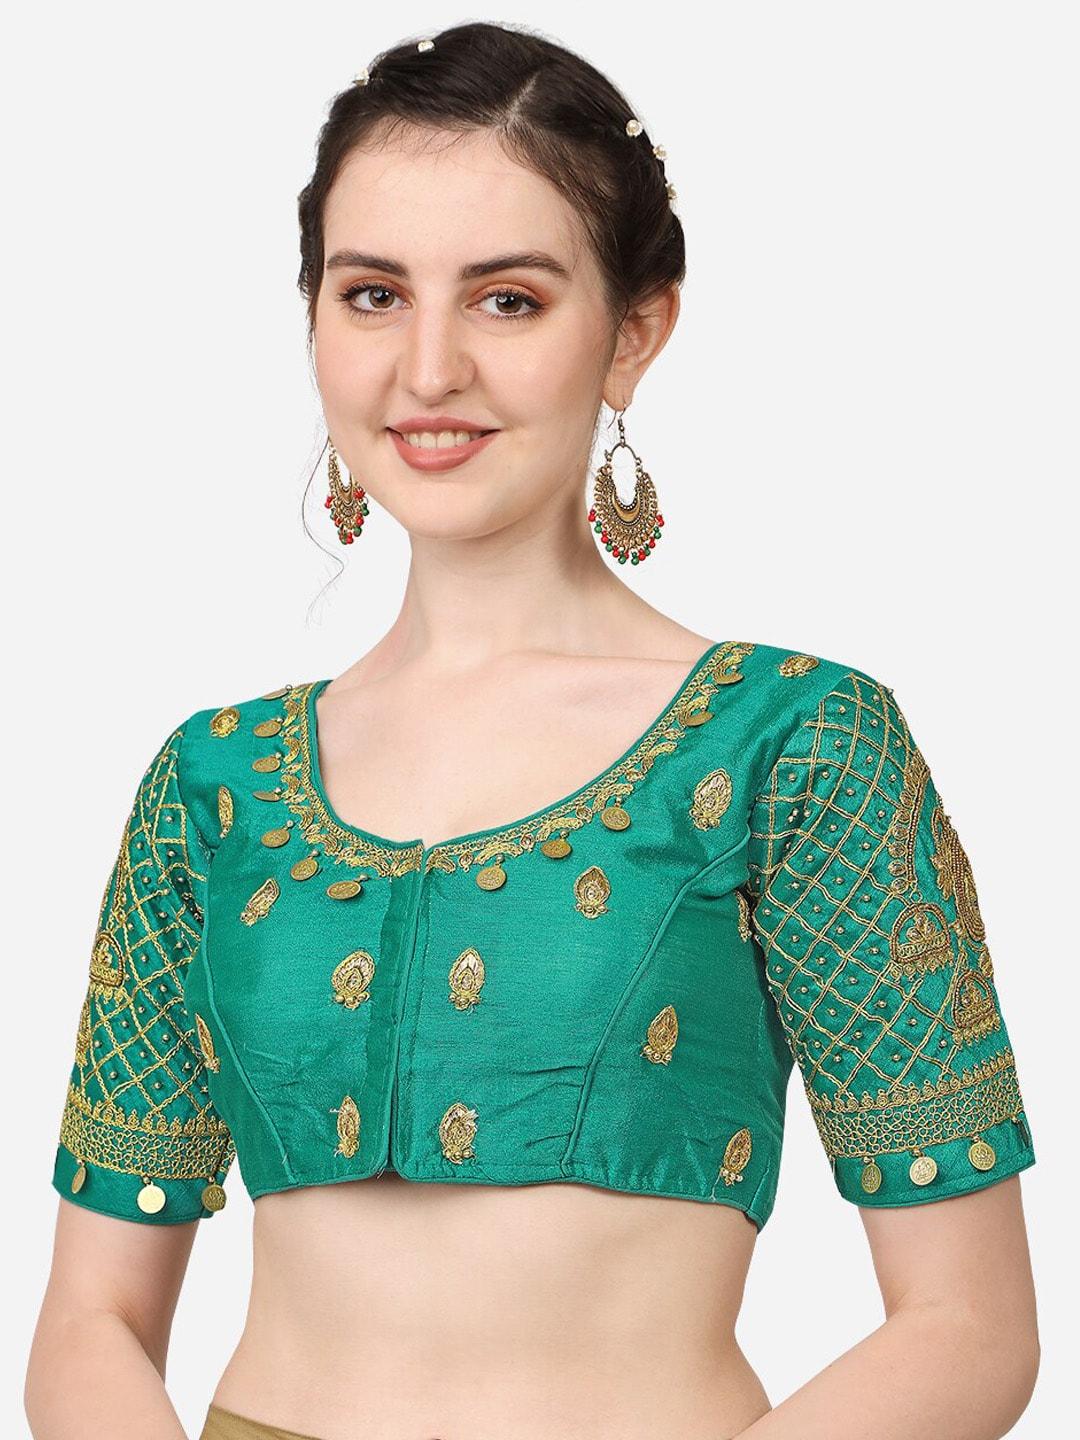 pujia mills women teal blue embroidered saree blouse